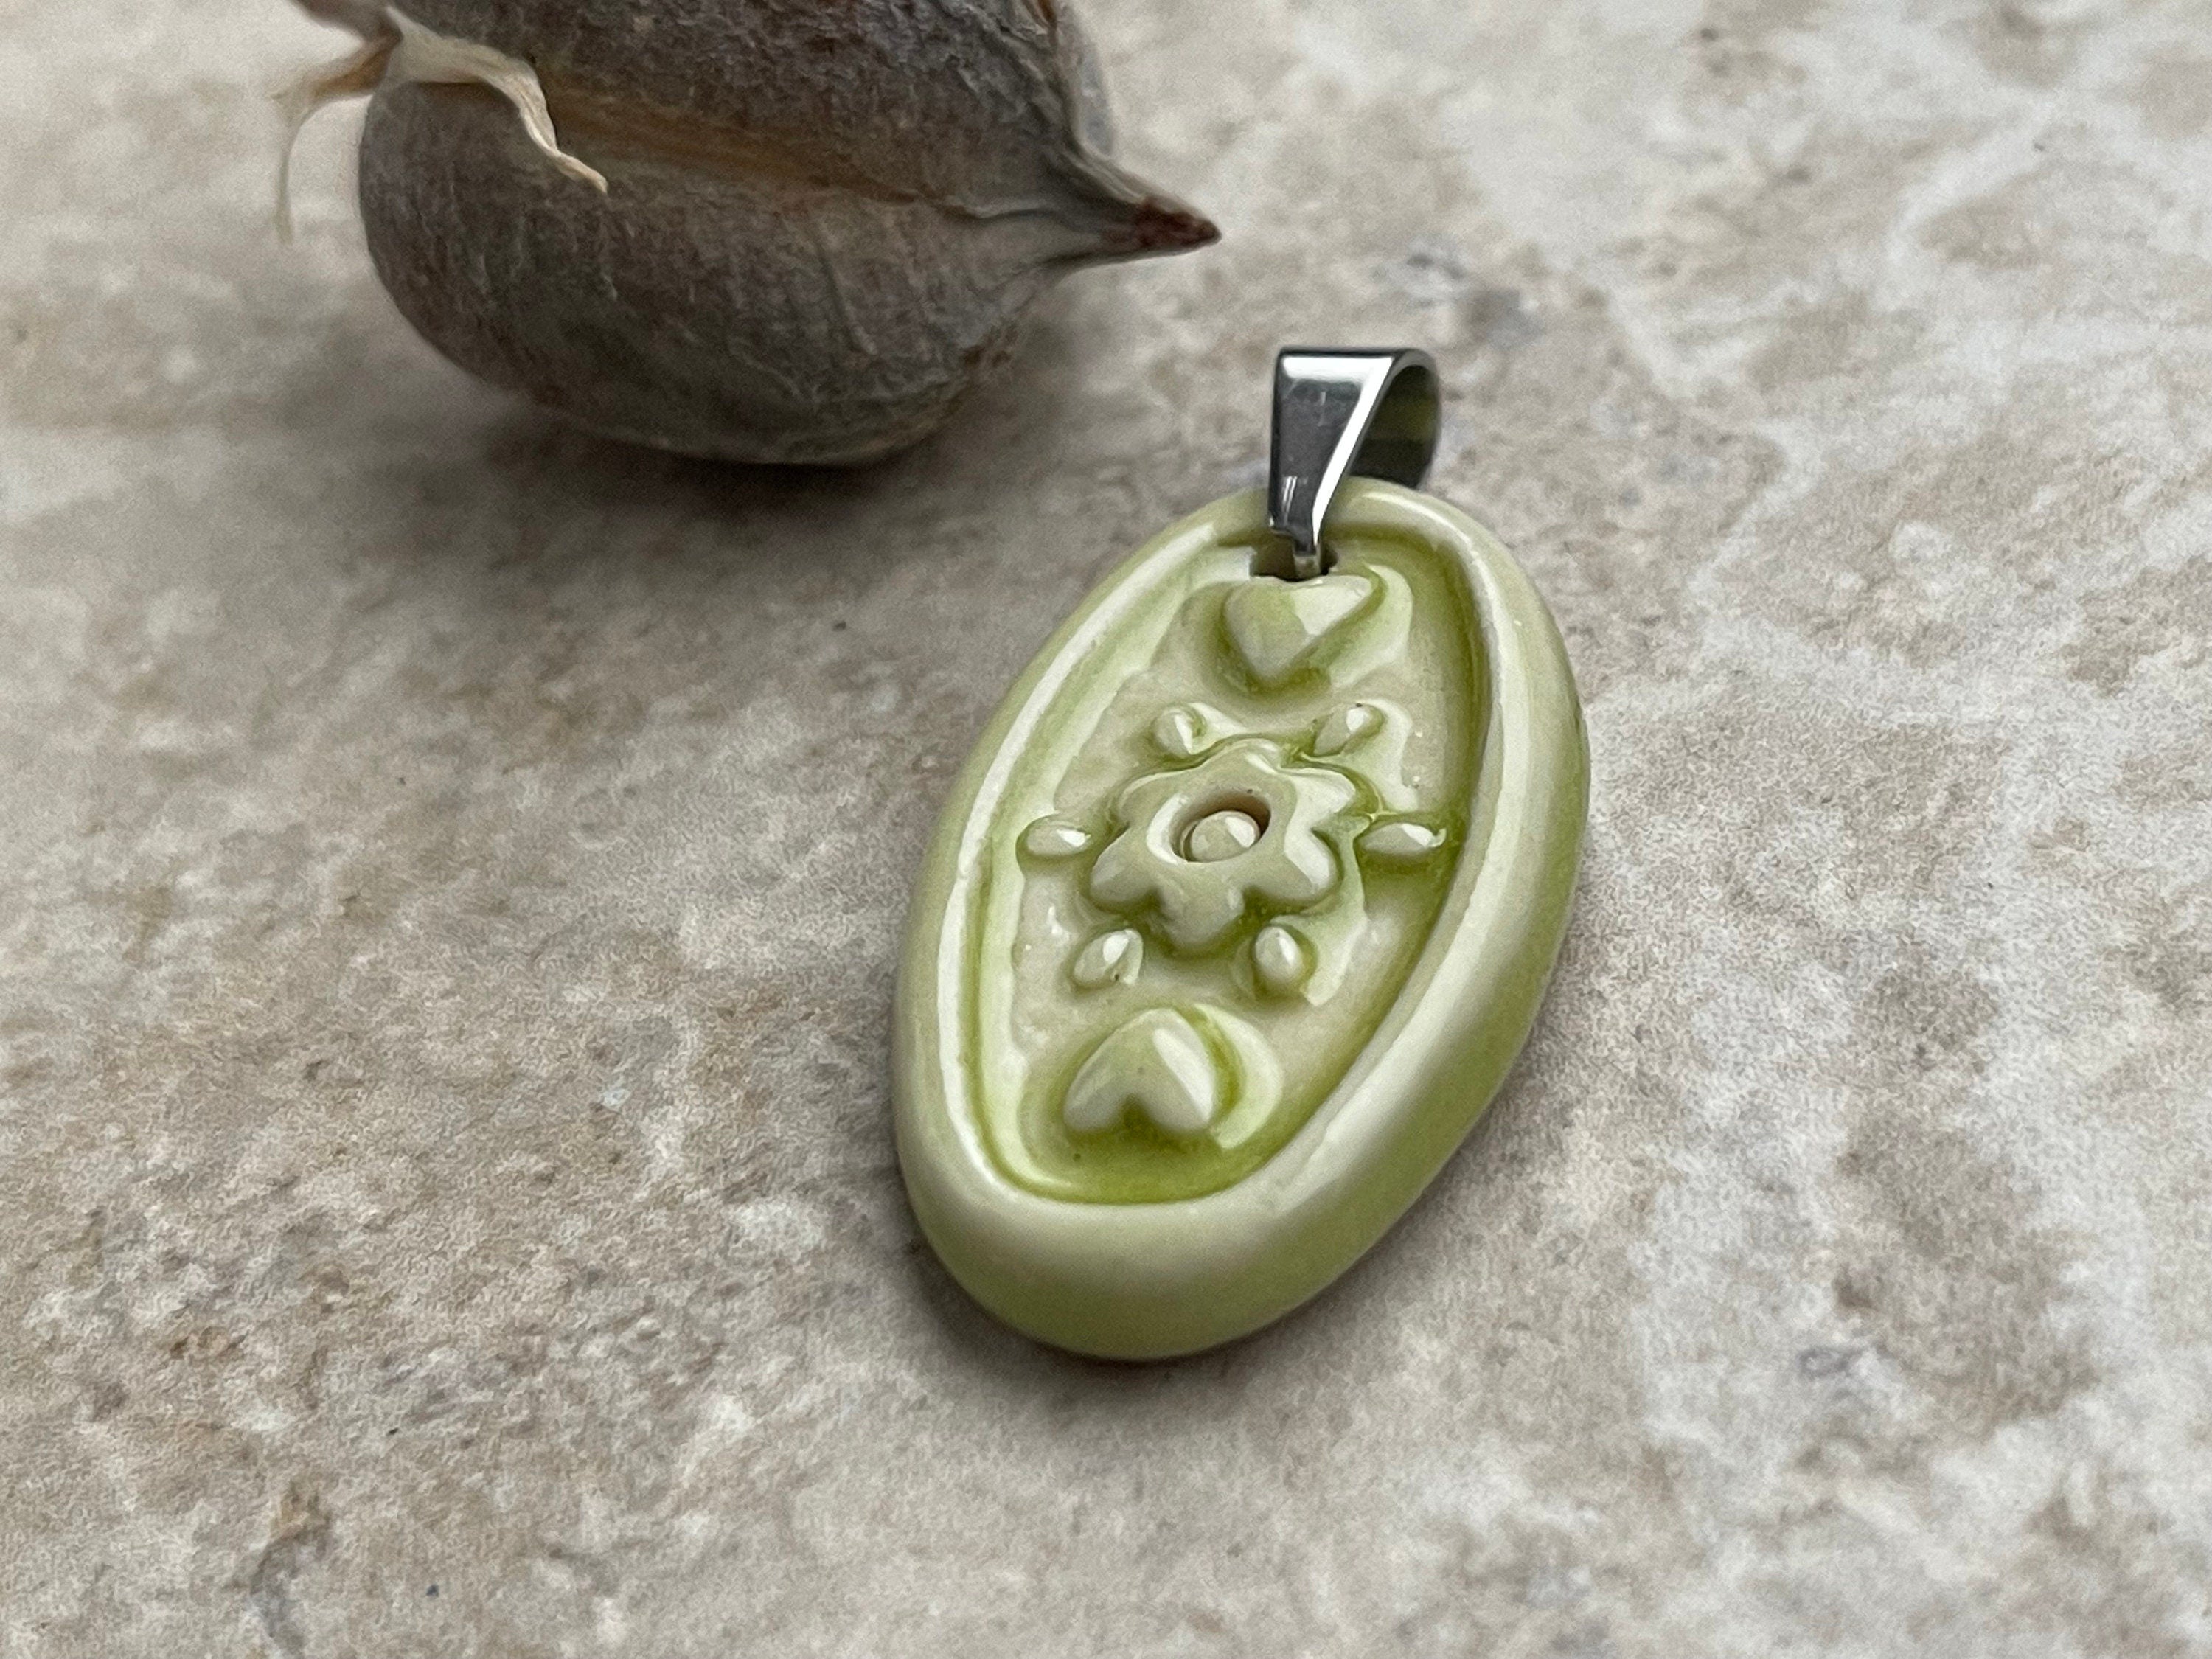 chartreuse Oval Heart Pendant, Dainty Layering Necklace, Paperclip chain, Green Pendant, Porcelain Ceramic Pendant, Jewelry Making Component